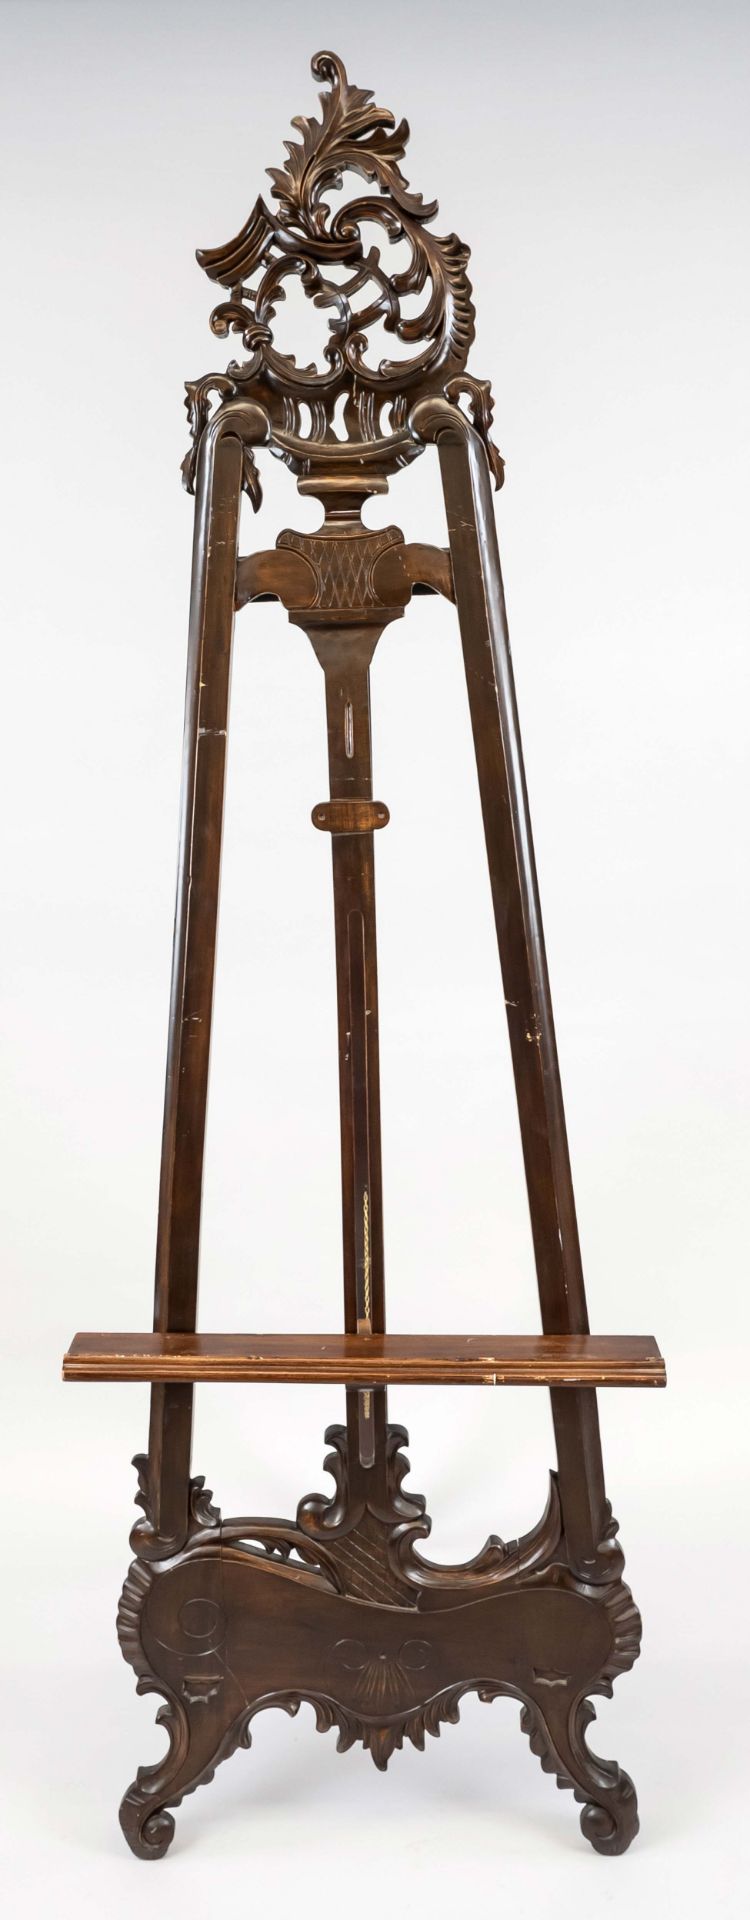 Easel, mid 20th century, mahogany? Openwork and carved. Height-adjustable picture rest, fold-out